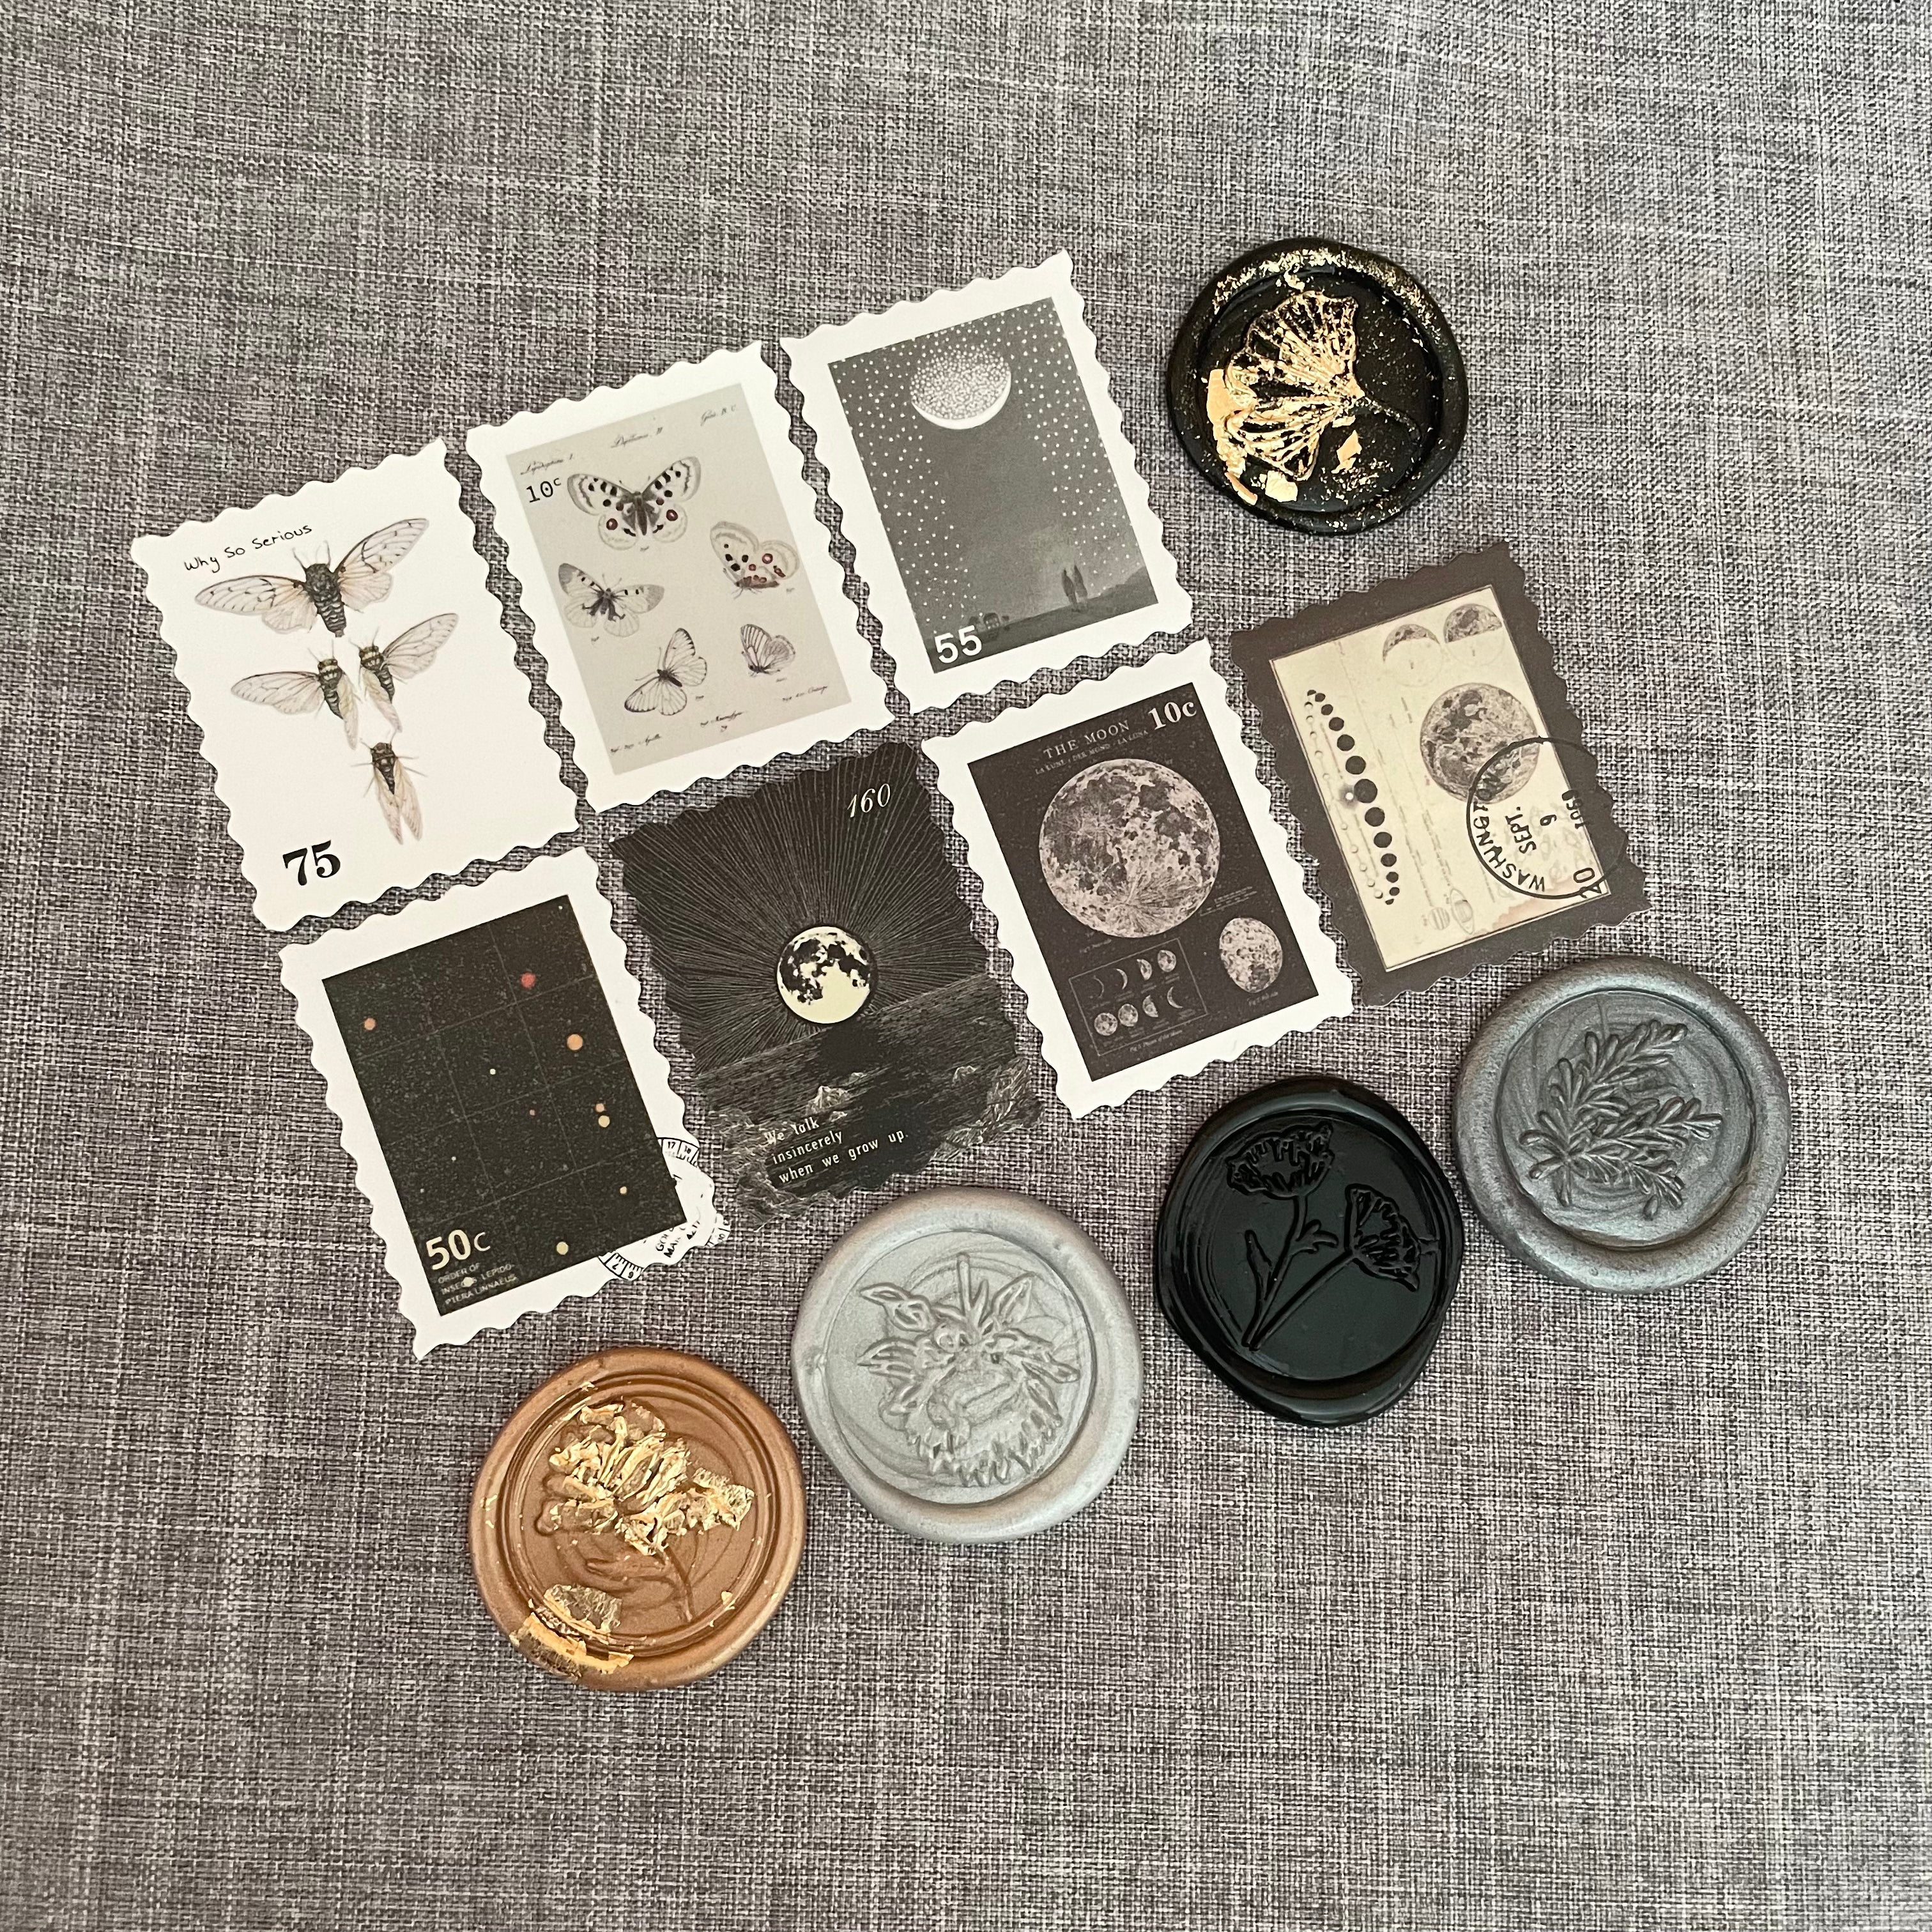 Black & Gold Mini Flat Lay Prop Kit including 5 wax seals and 7 faux postage stamps in shades of Black & Gray - Wedding Flat lay props from Champagne & GRI